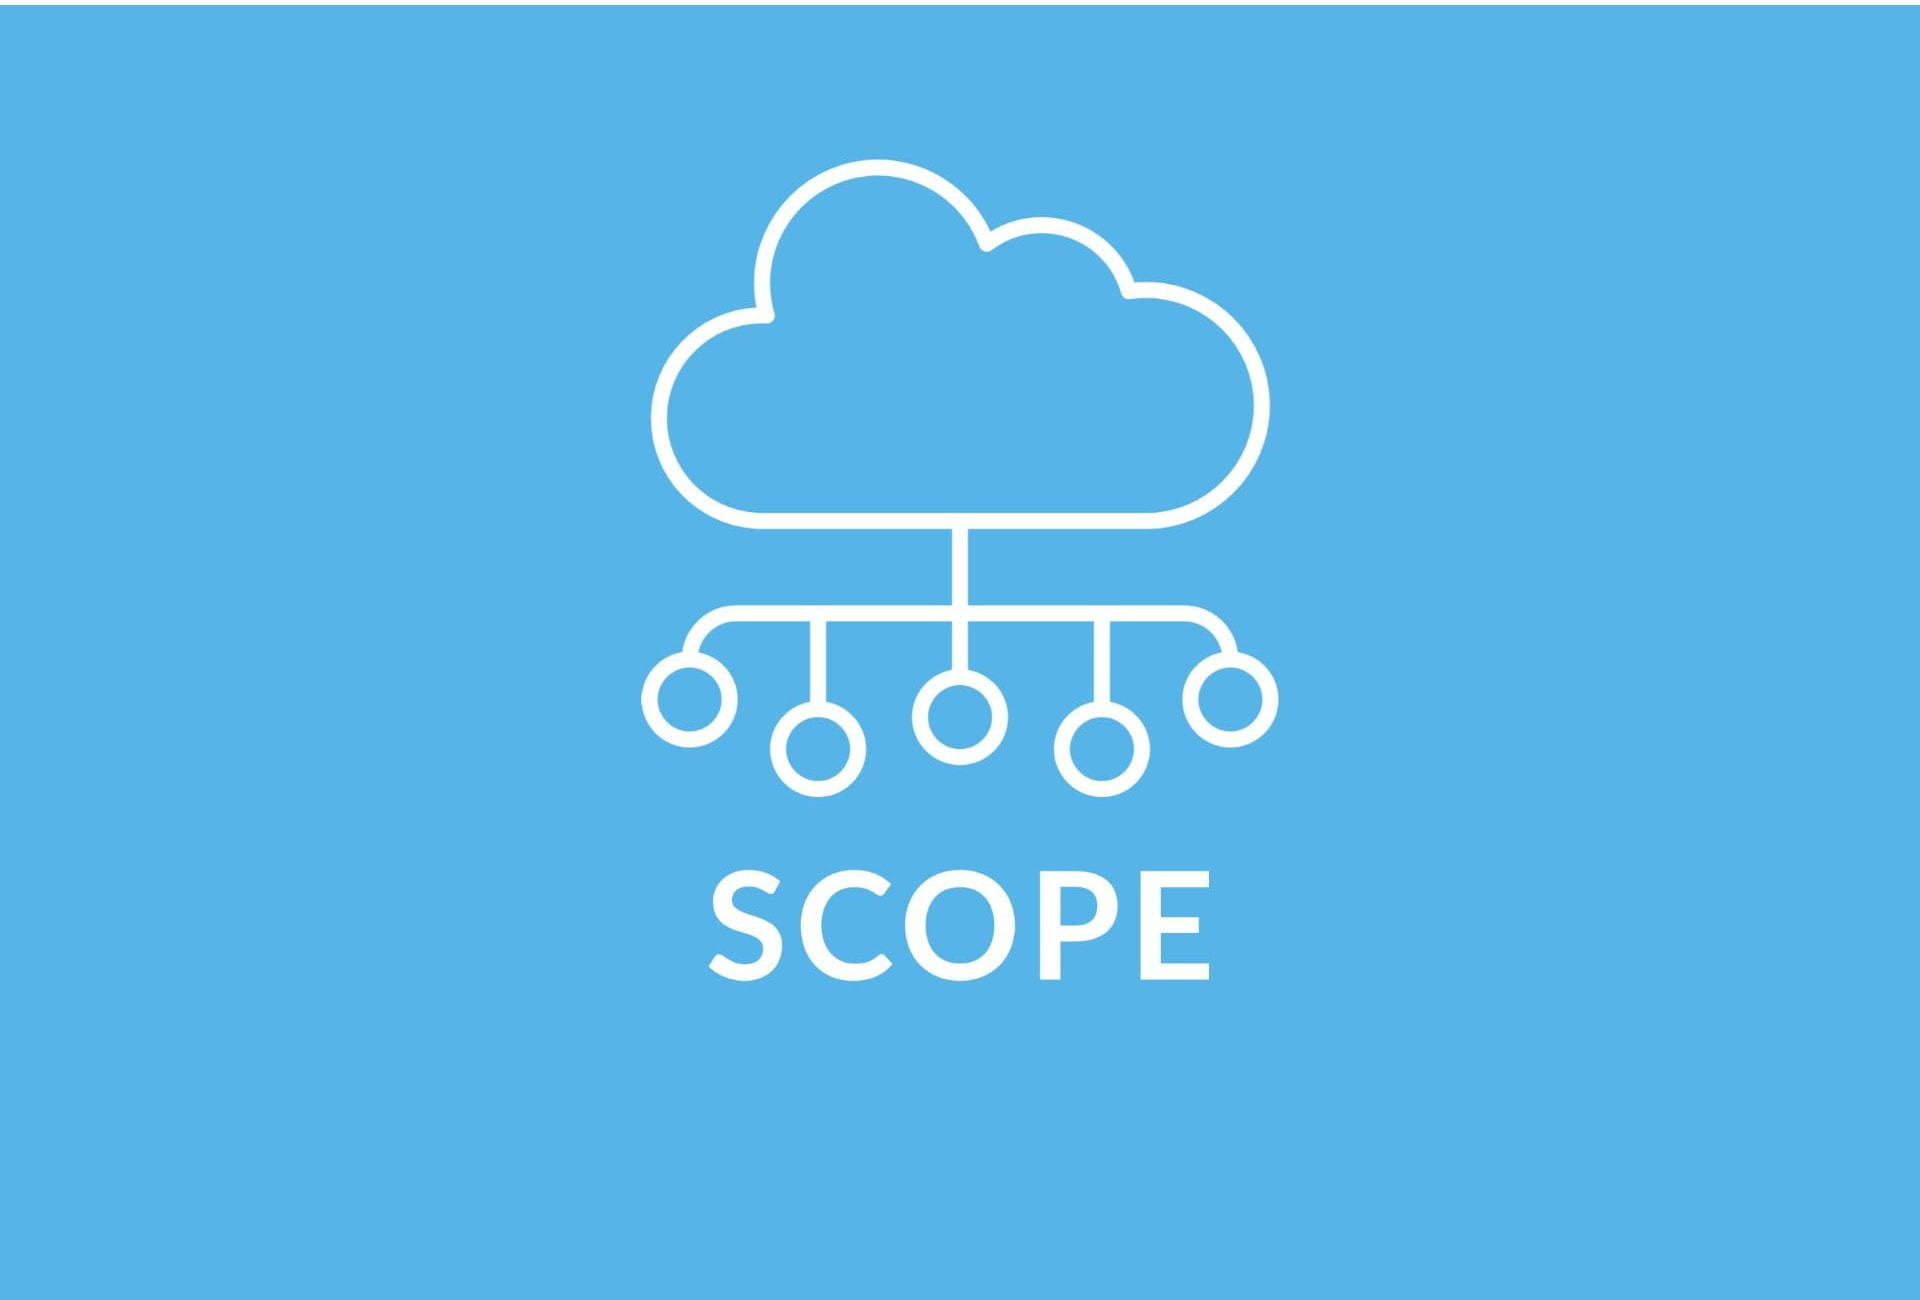 Blue rectangle with the word Scope and an icon of a cloud connected to timeline.